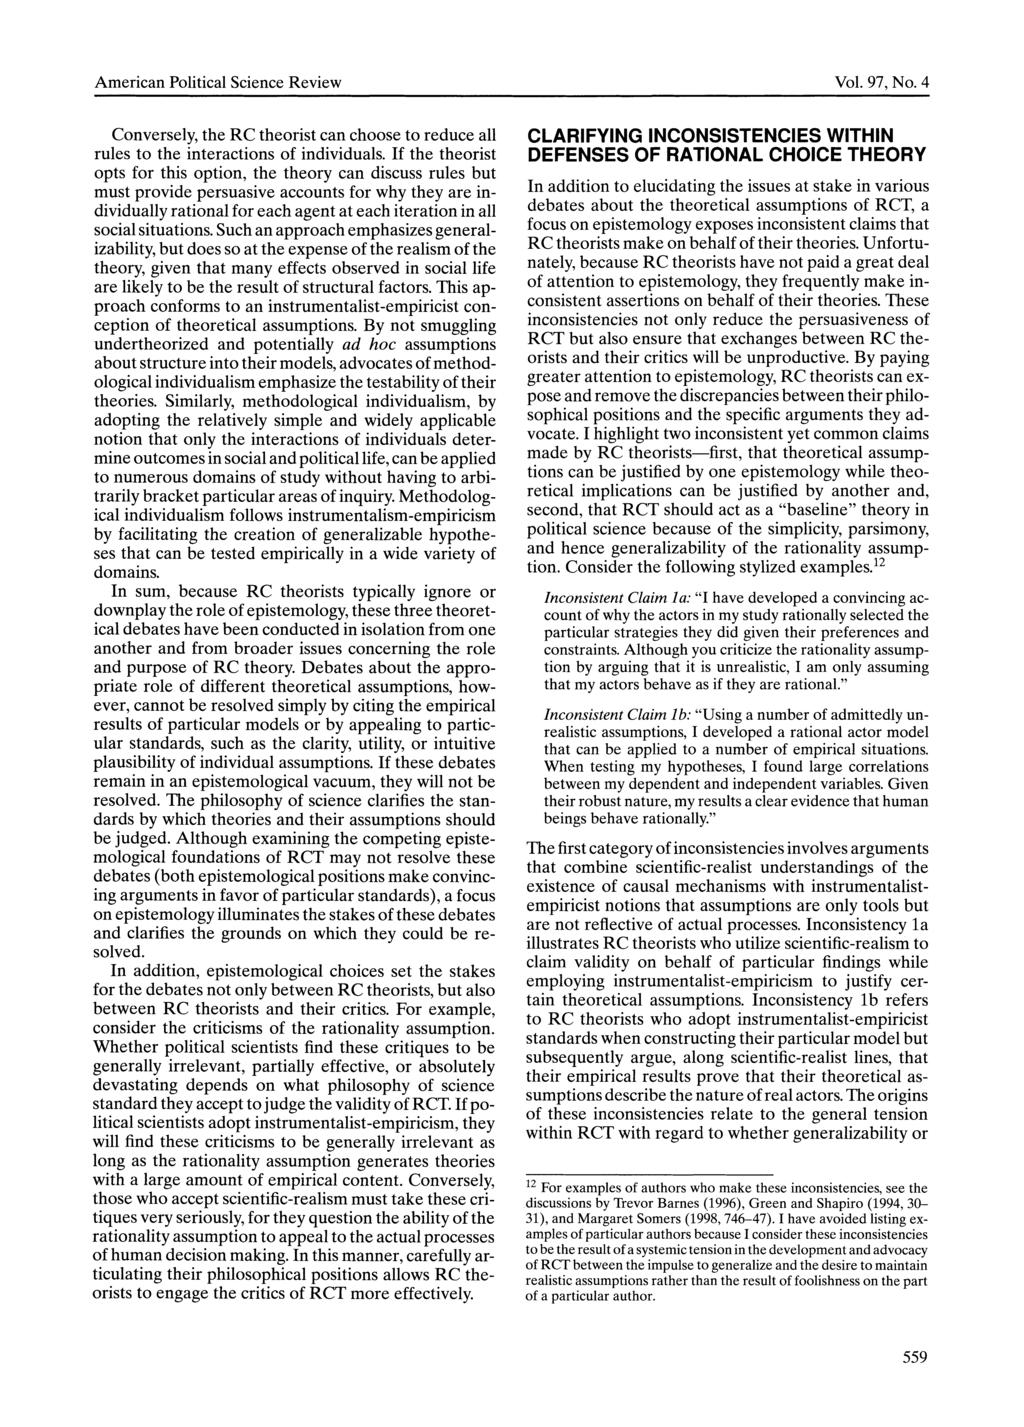 American Political Science Review Vol. 97, No. 4 Conversely, the RC theorist can choose to reduce all rules to the interactions of individuals.